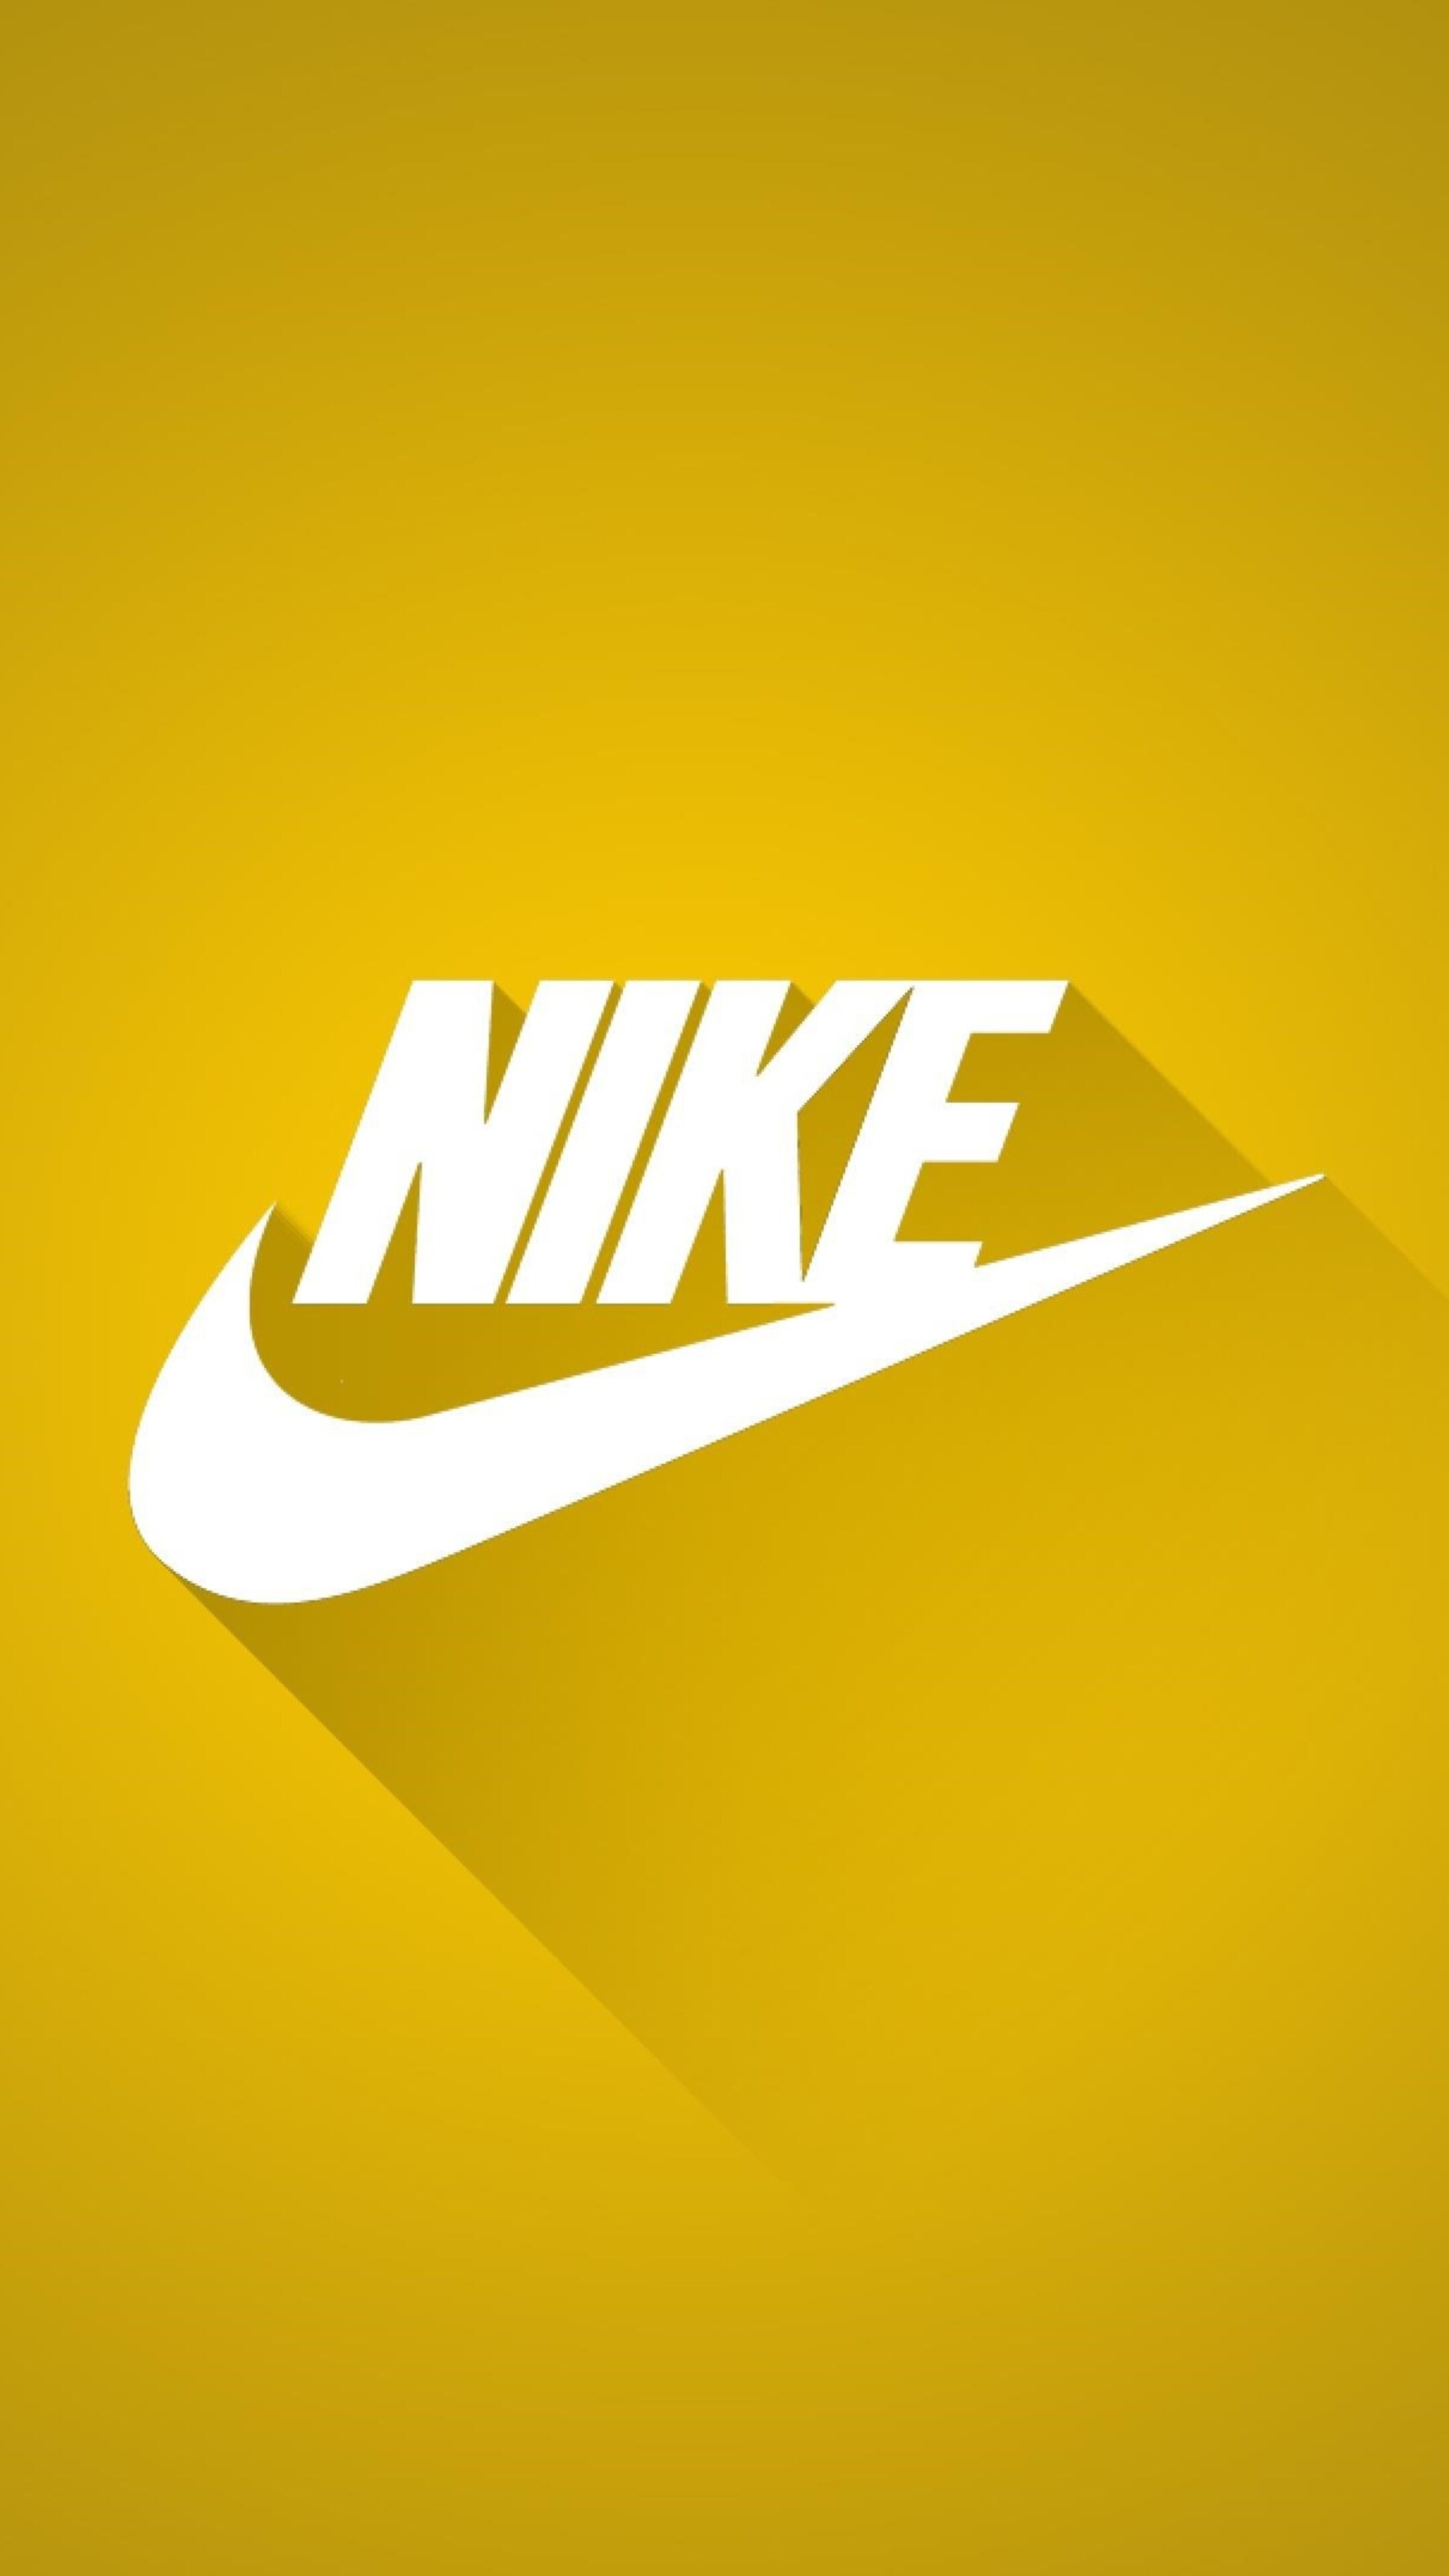 Nike logo, Sony Xperia HD wallpapers, 4K images, Sports brand, 2160x3840 4K Phone